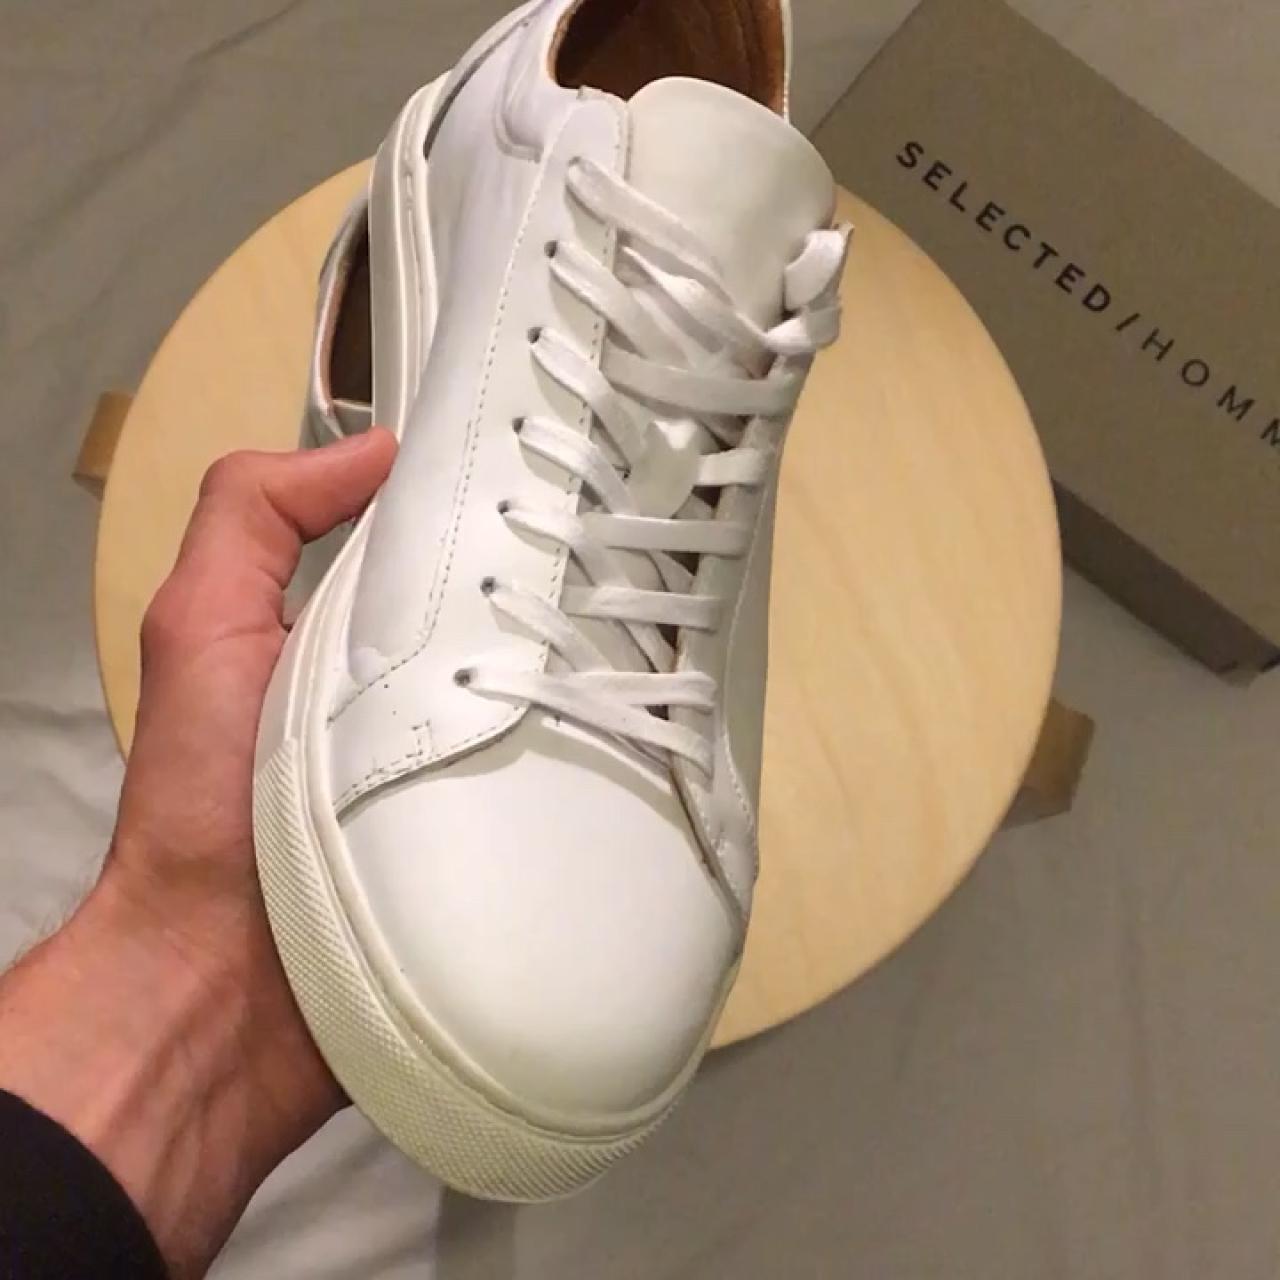 Selected Homme 'David' sneakers, SIZE 8 